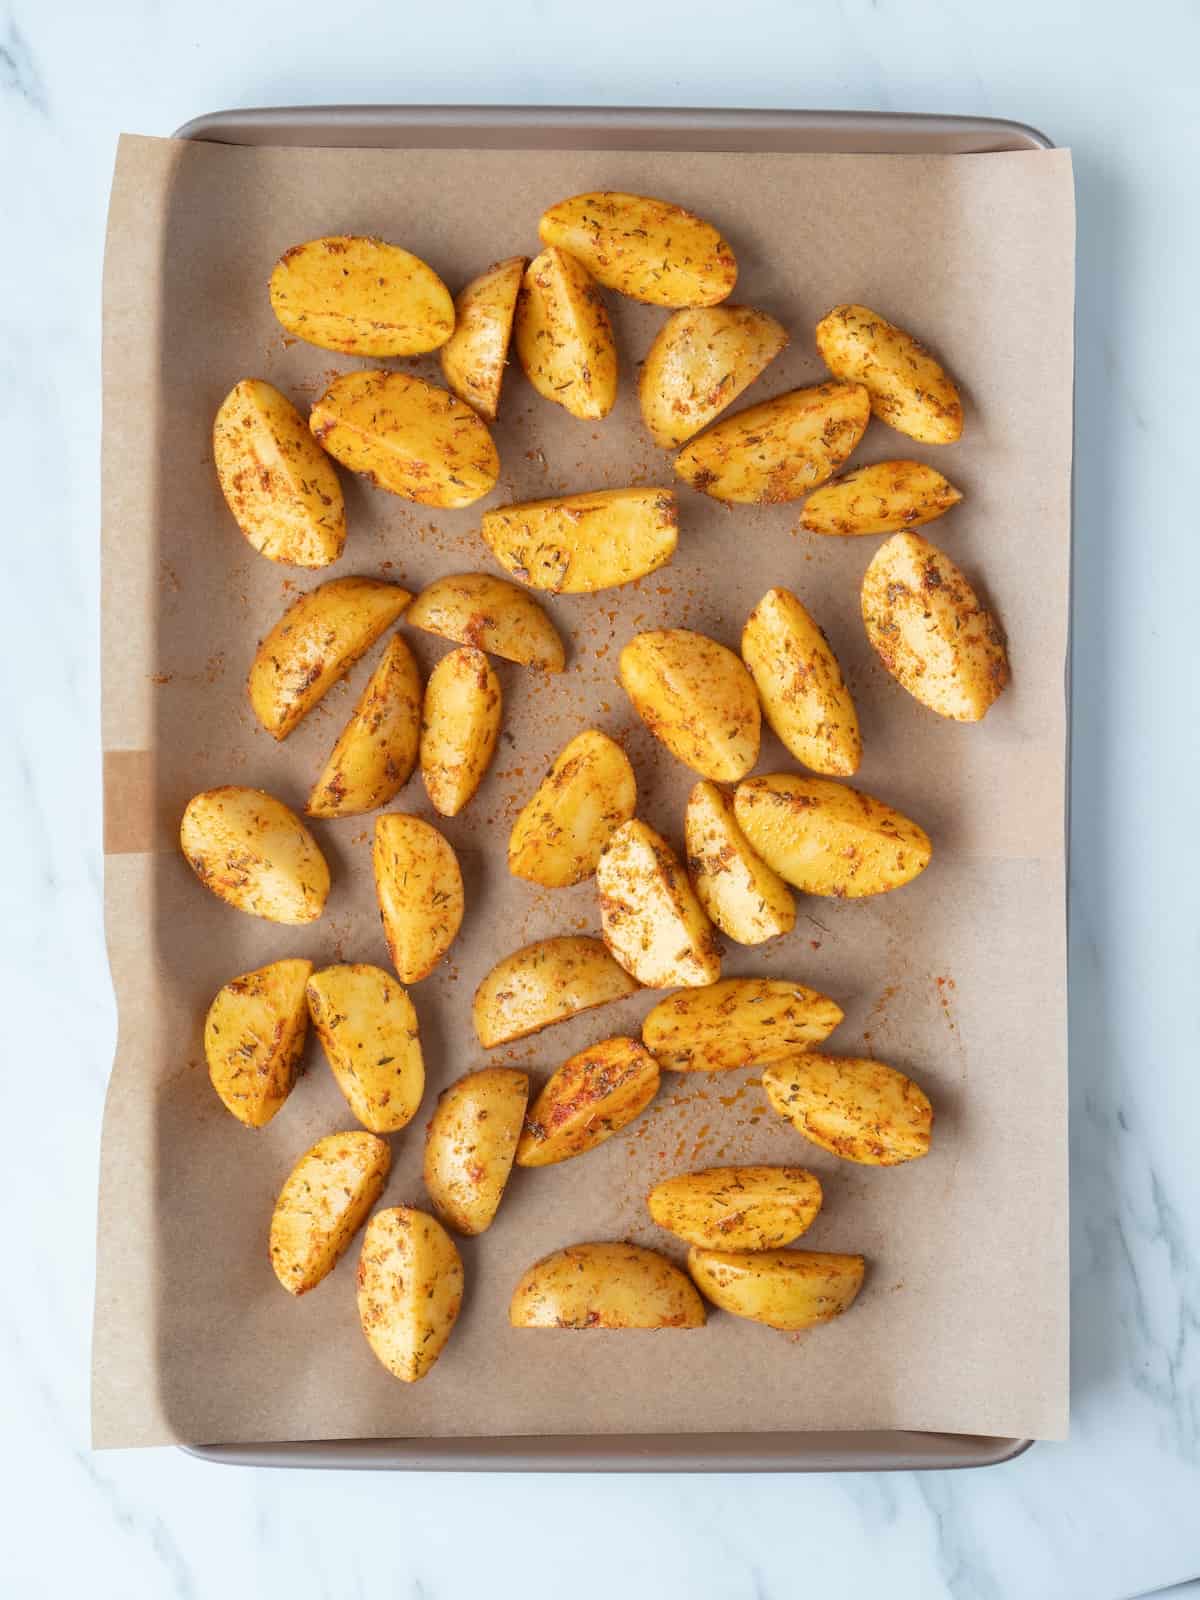 A parchment-lined baking sheet with quartered potatoes tossed in seasoning and oil.